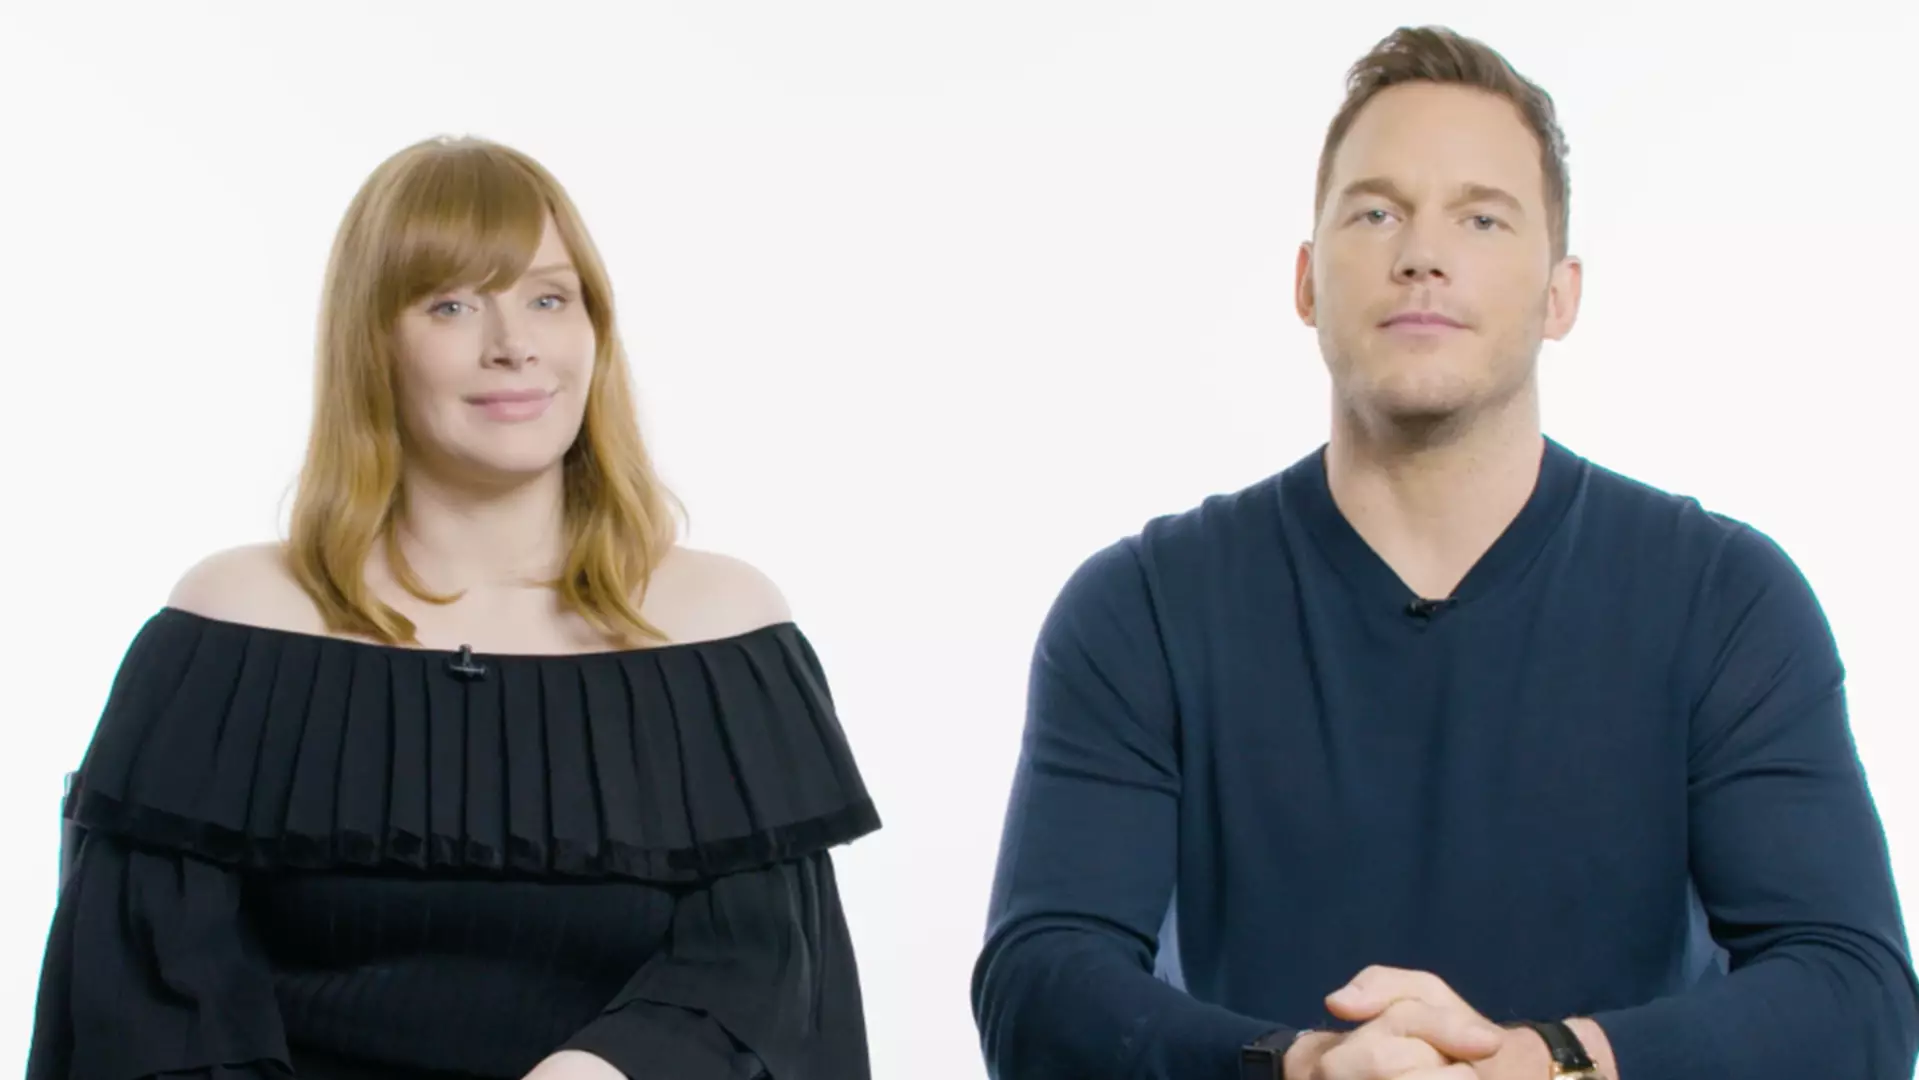 Rate My Dinosaur: Chris Pratt And Bryce Dallas Howard Rate Your Videos